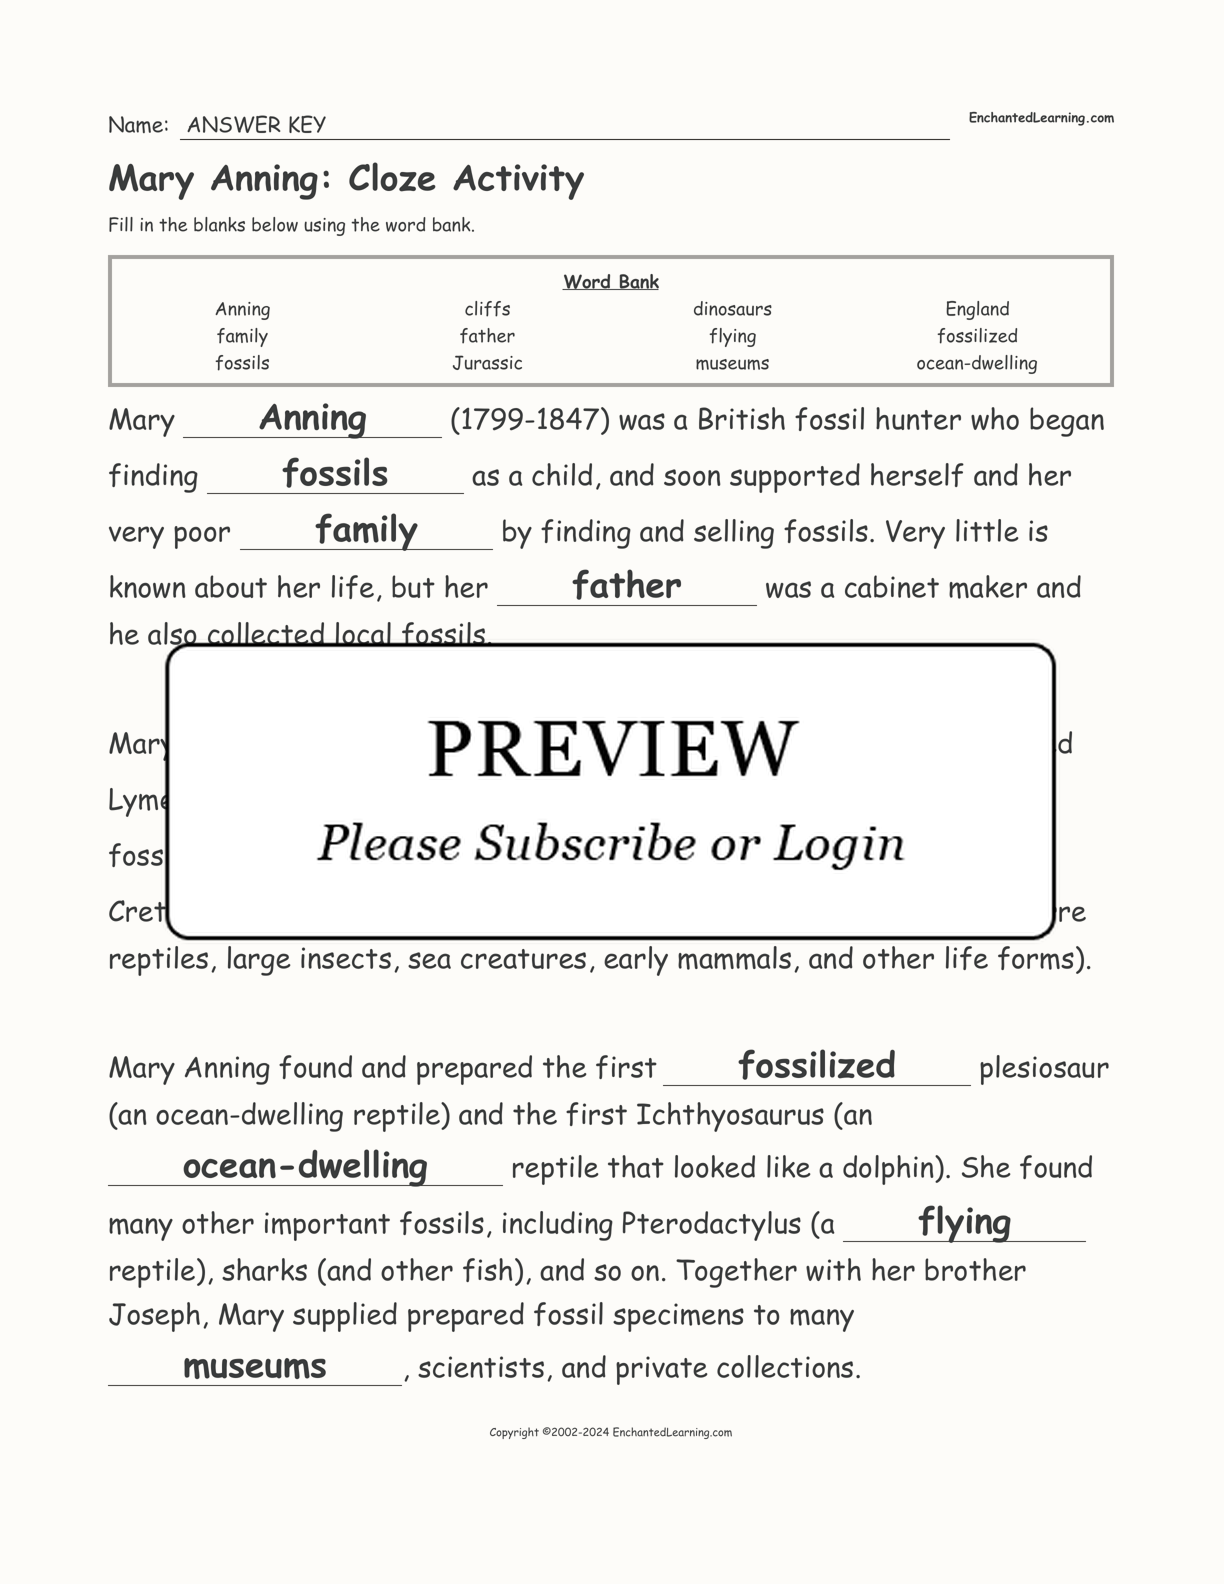 Mary Anning: Cloze Activity interactive worksheet page 2